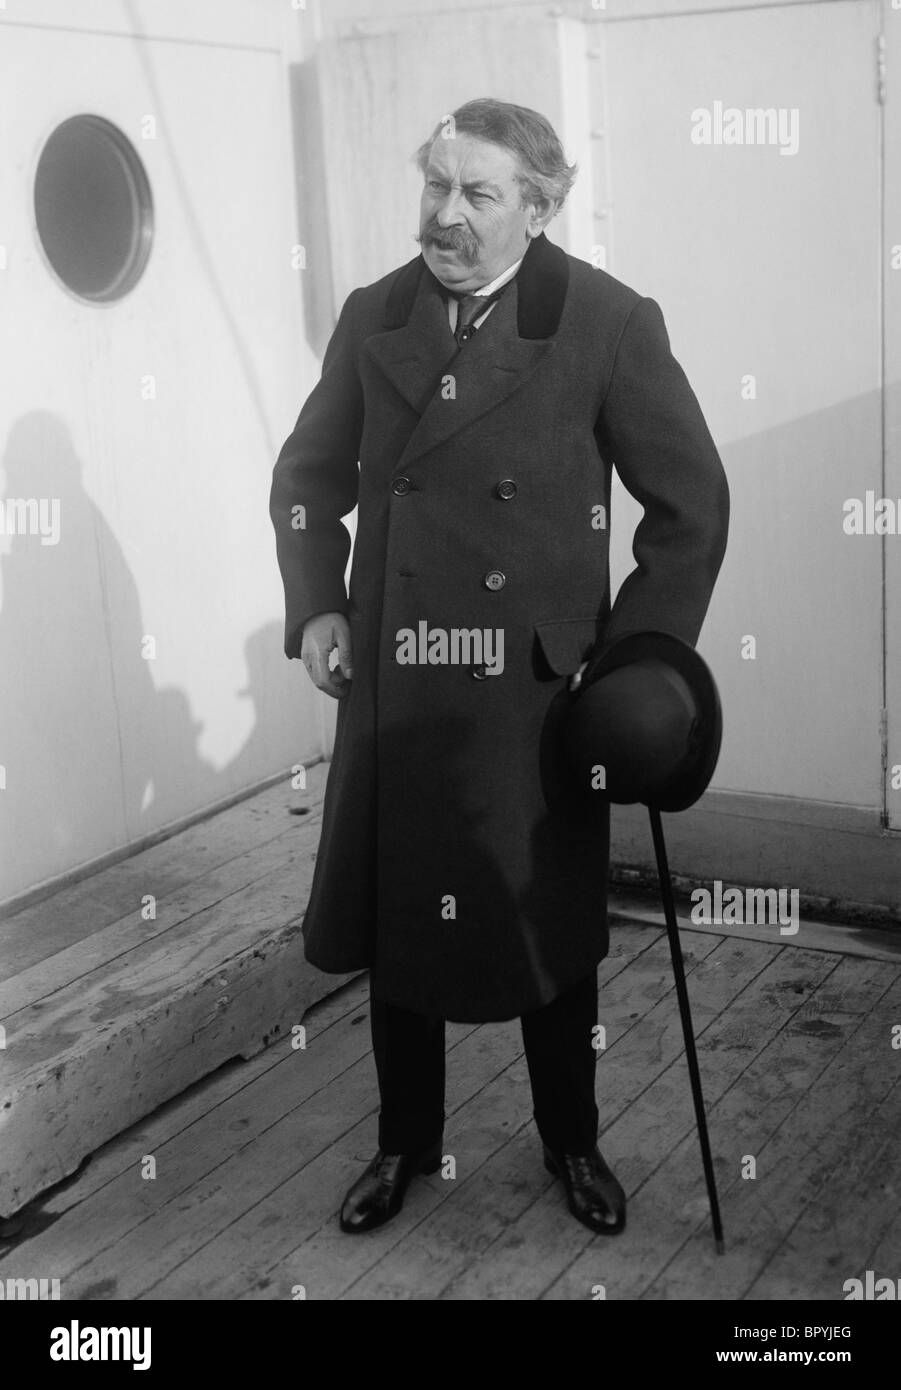 Vintage photo c1920s of Aristide Briand (1862 - 1932) - Prime Minister of France on several occasions between 1909 and 1929. Stock Photo